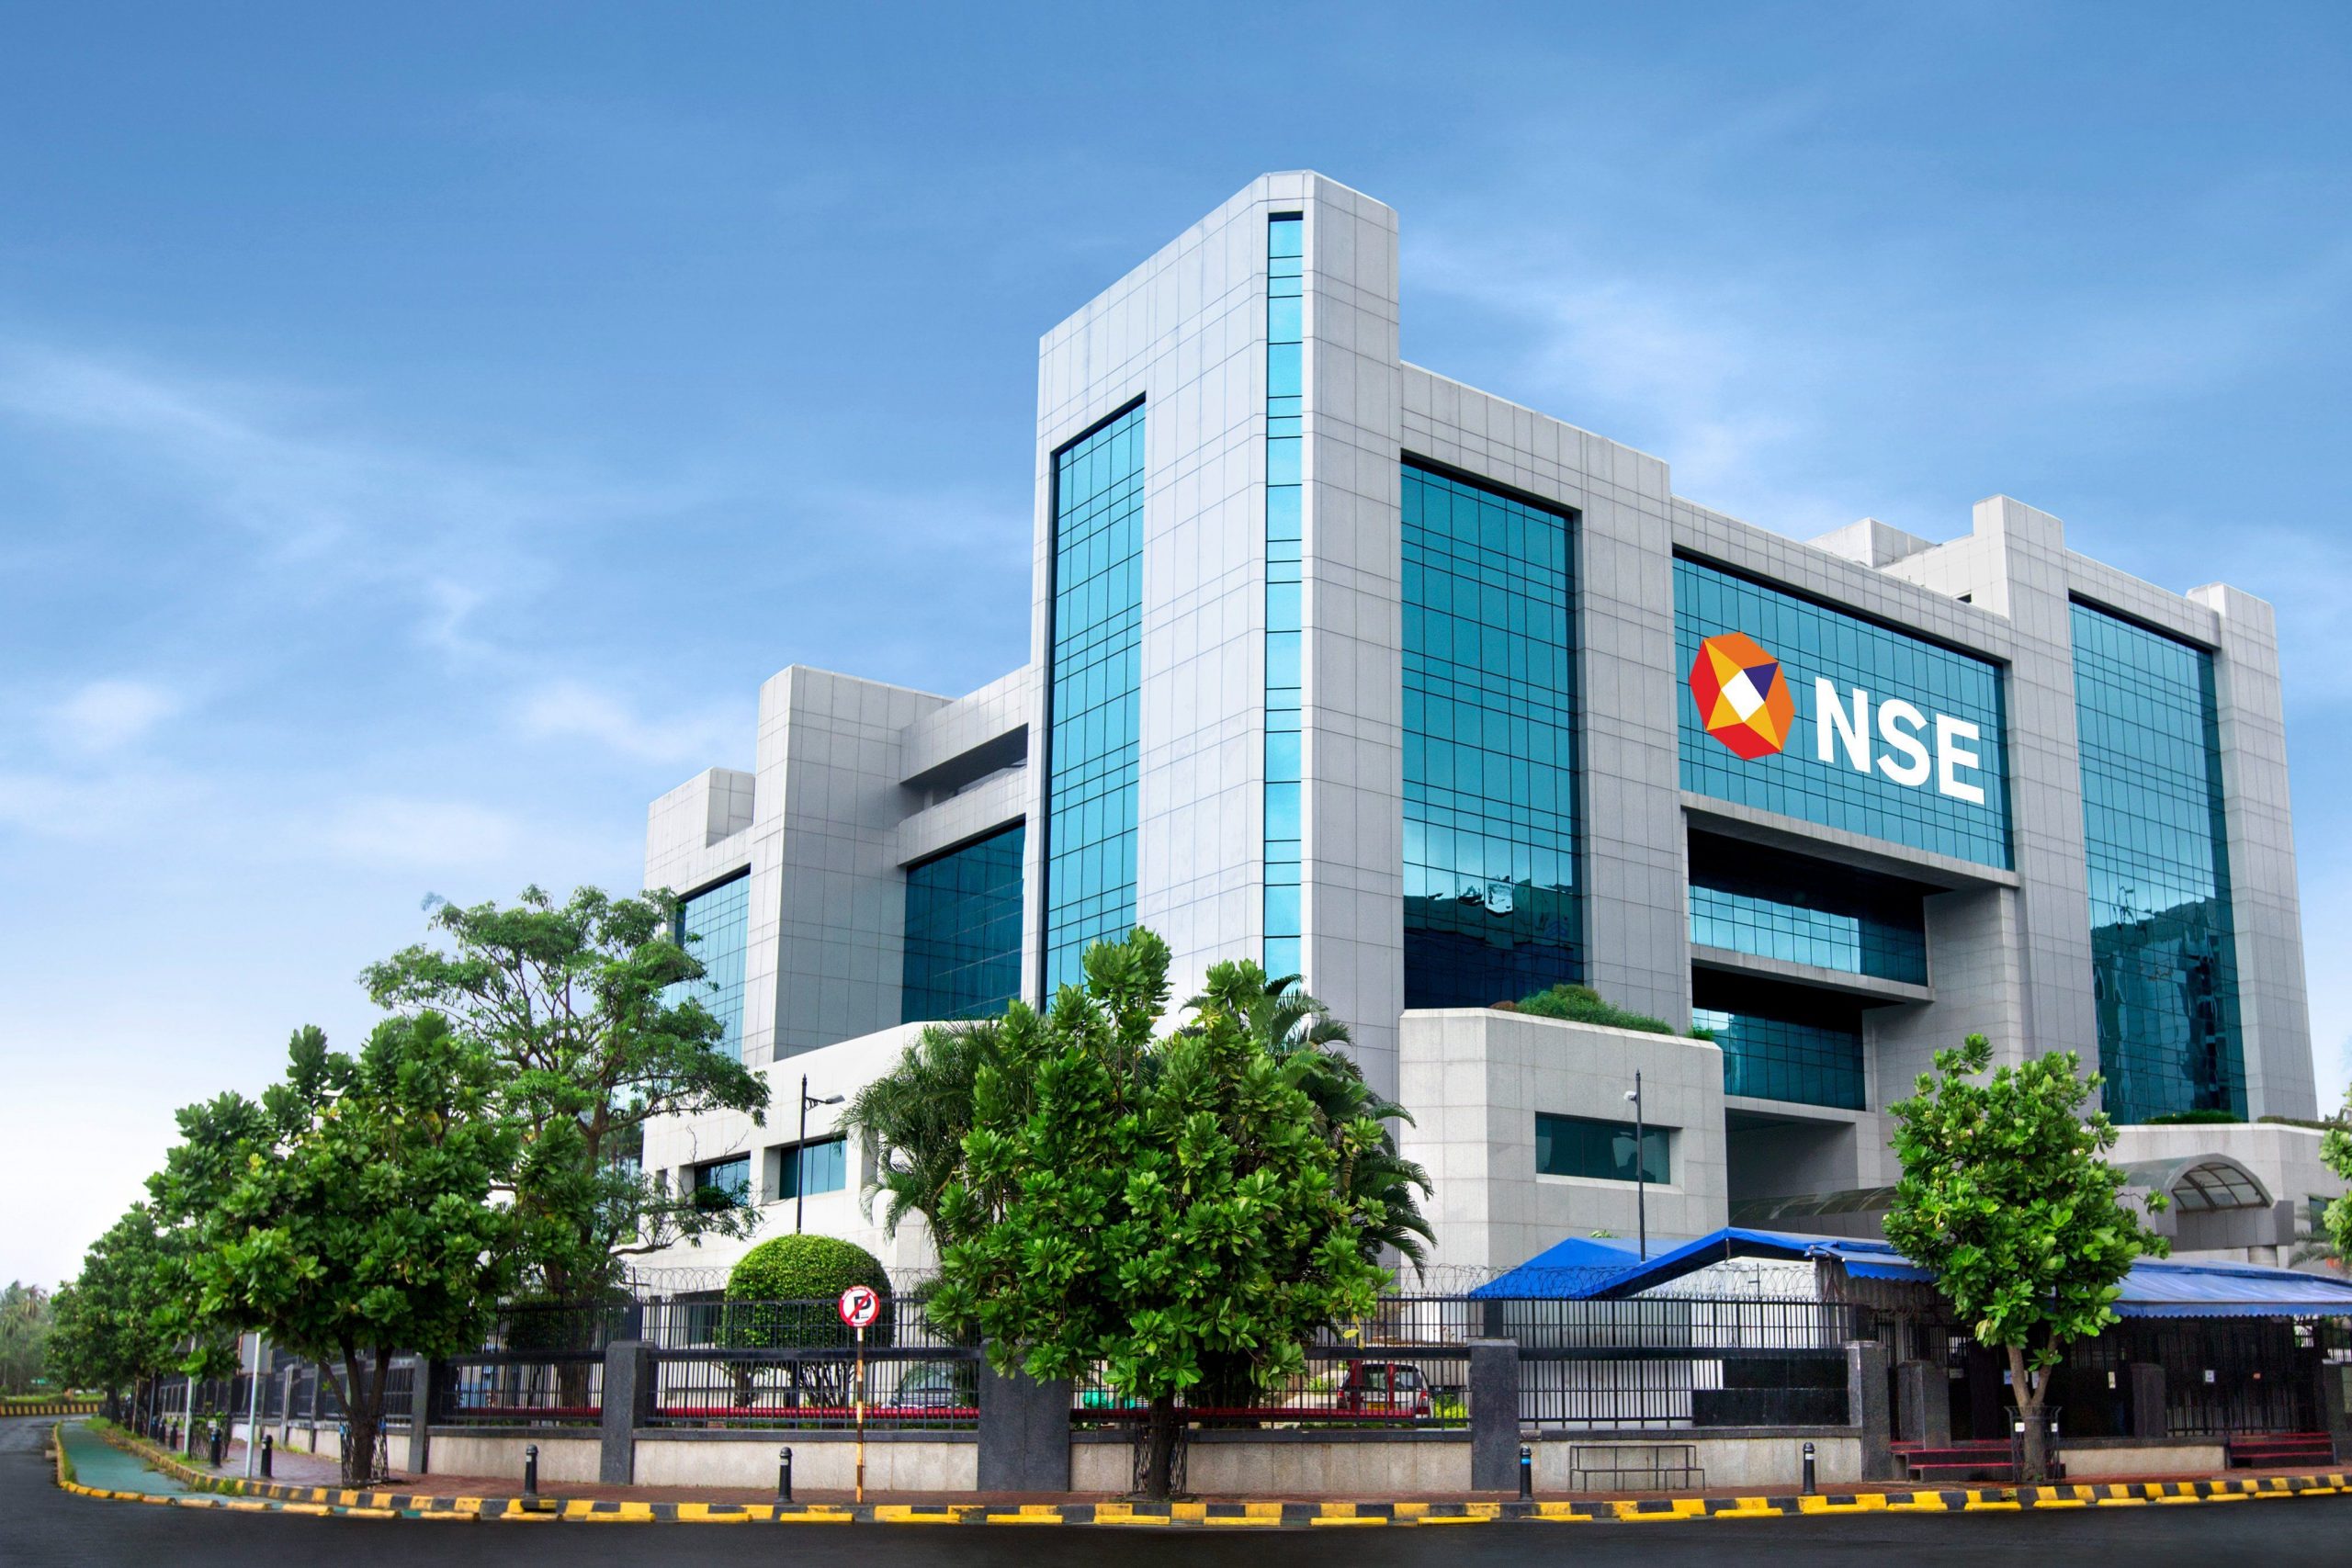 NSE F&O Ban: No stock has been put under ban on Wednesday, July 6, 2022